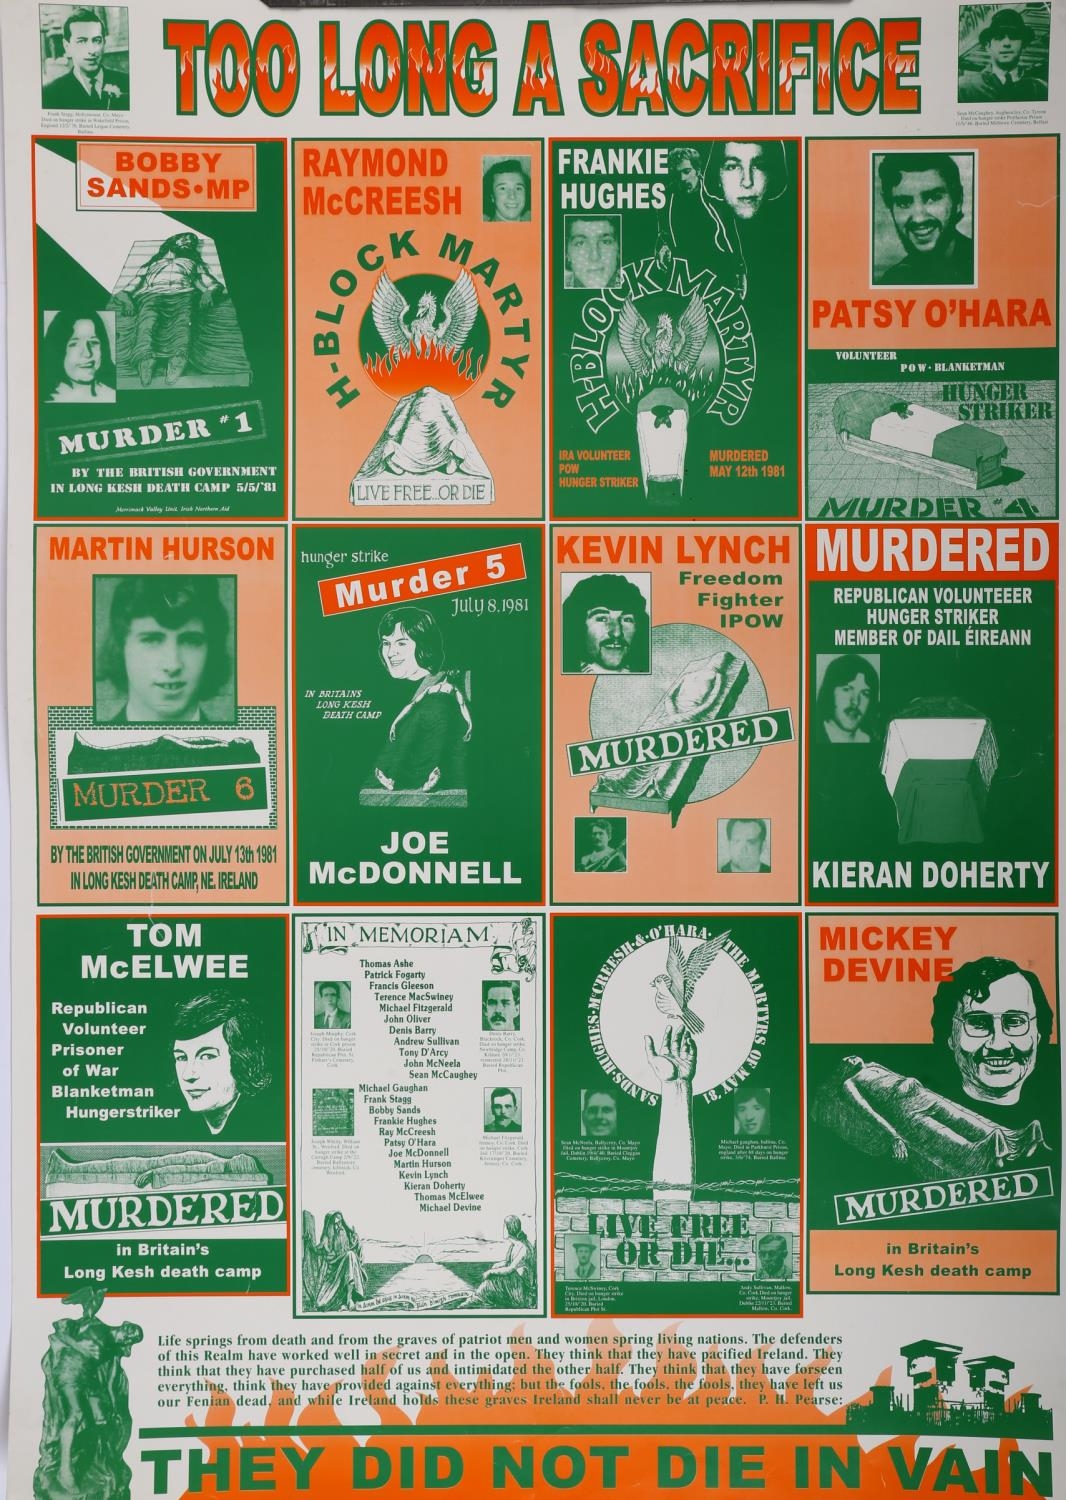 1981 Hunger Strike, commemorative posters. Three posters seeking support for and commemorating the - Image 2 of 3